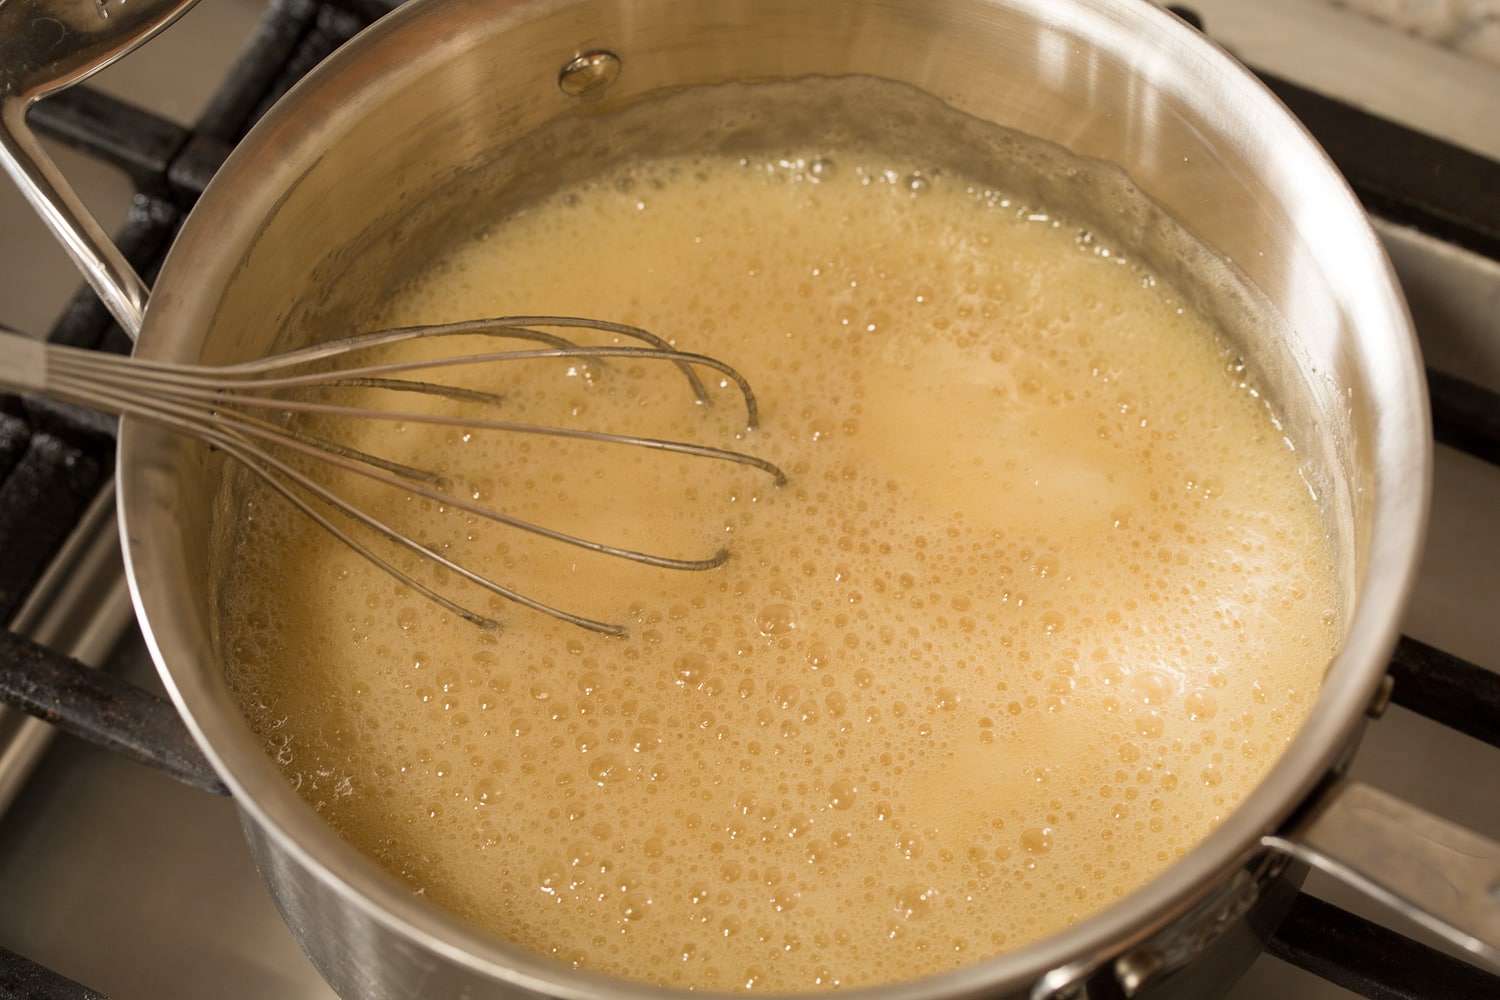 Completed buttermilk syrup in saucepan.